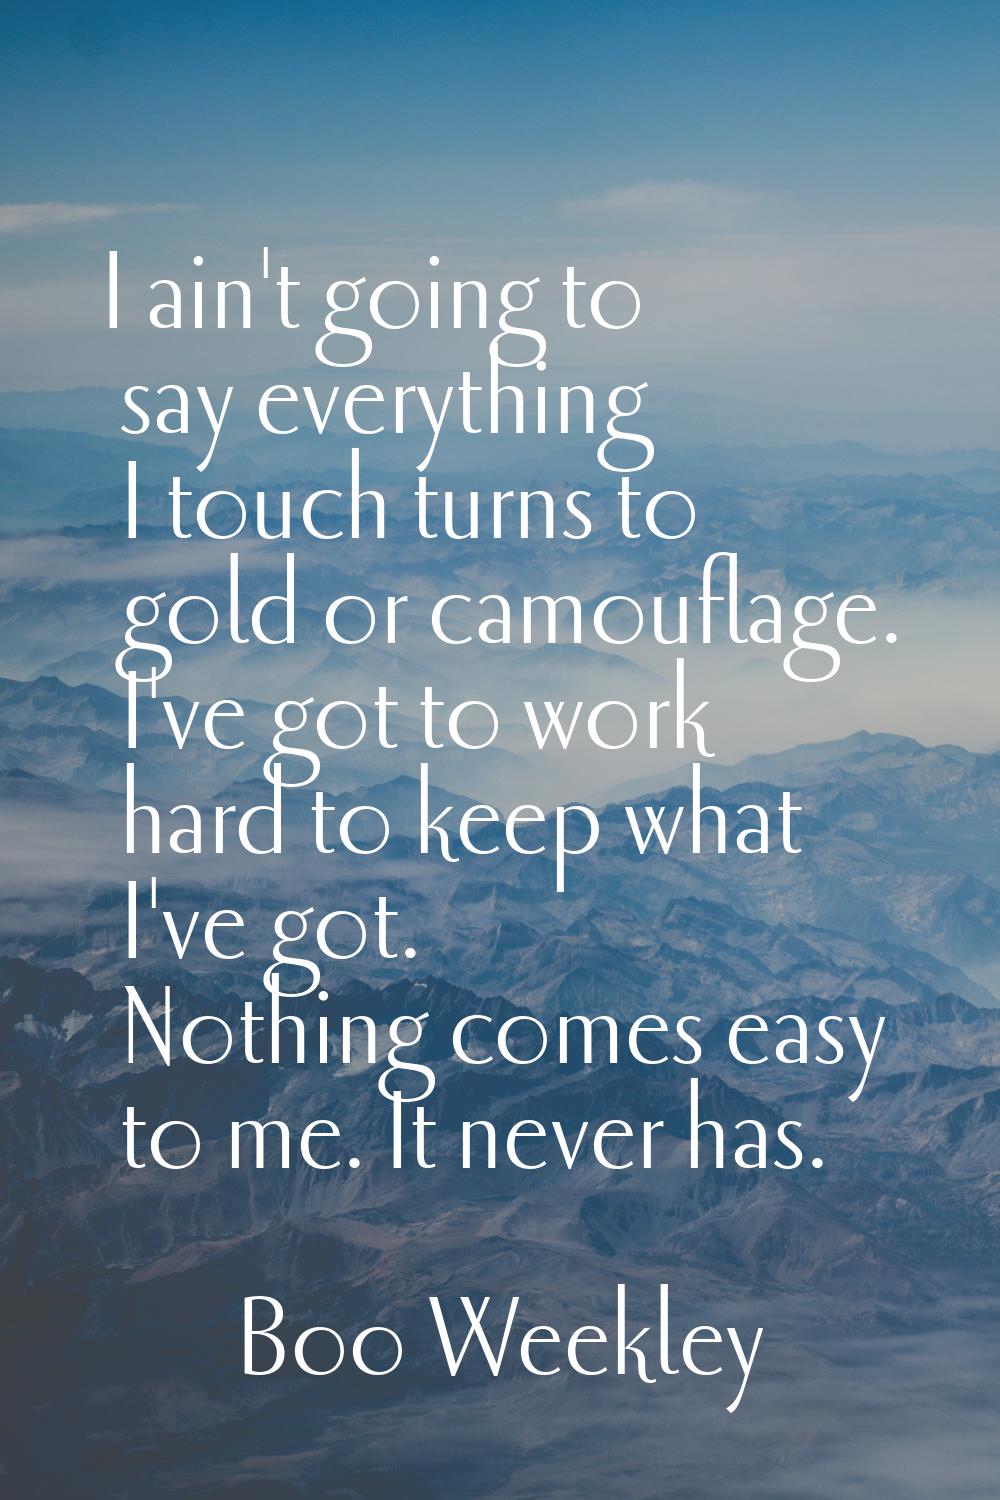 I ain't going to say everything I touch turns to gold or camouflage. I've got to work hard to keep 